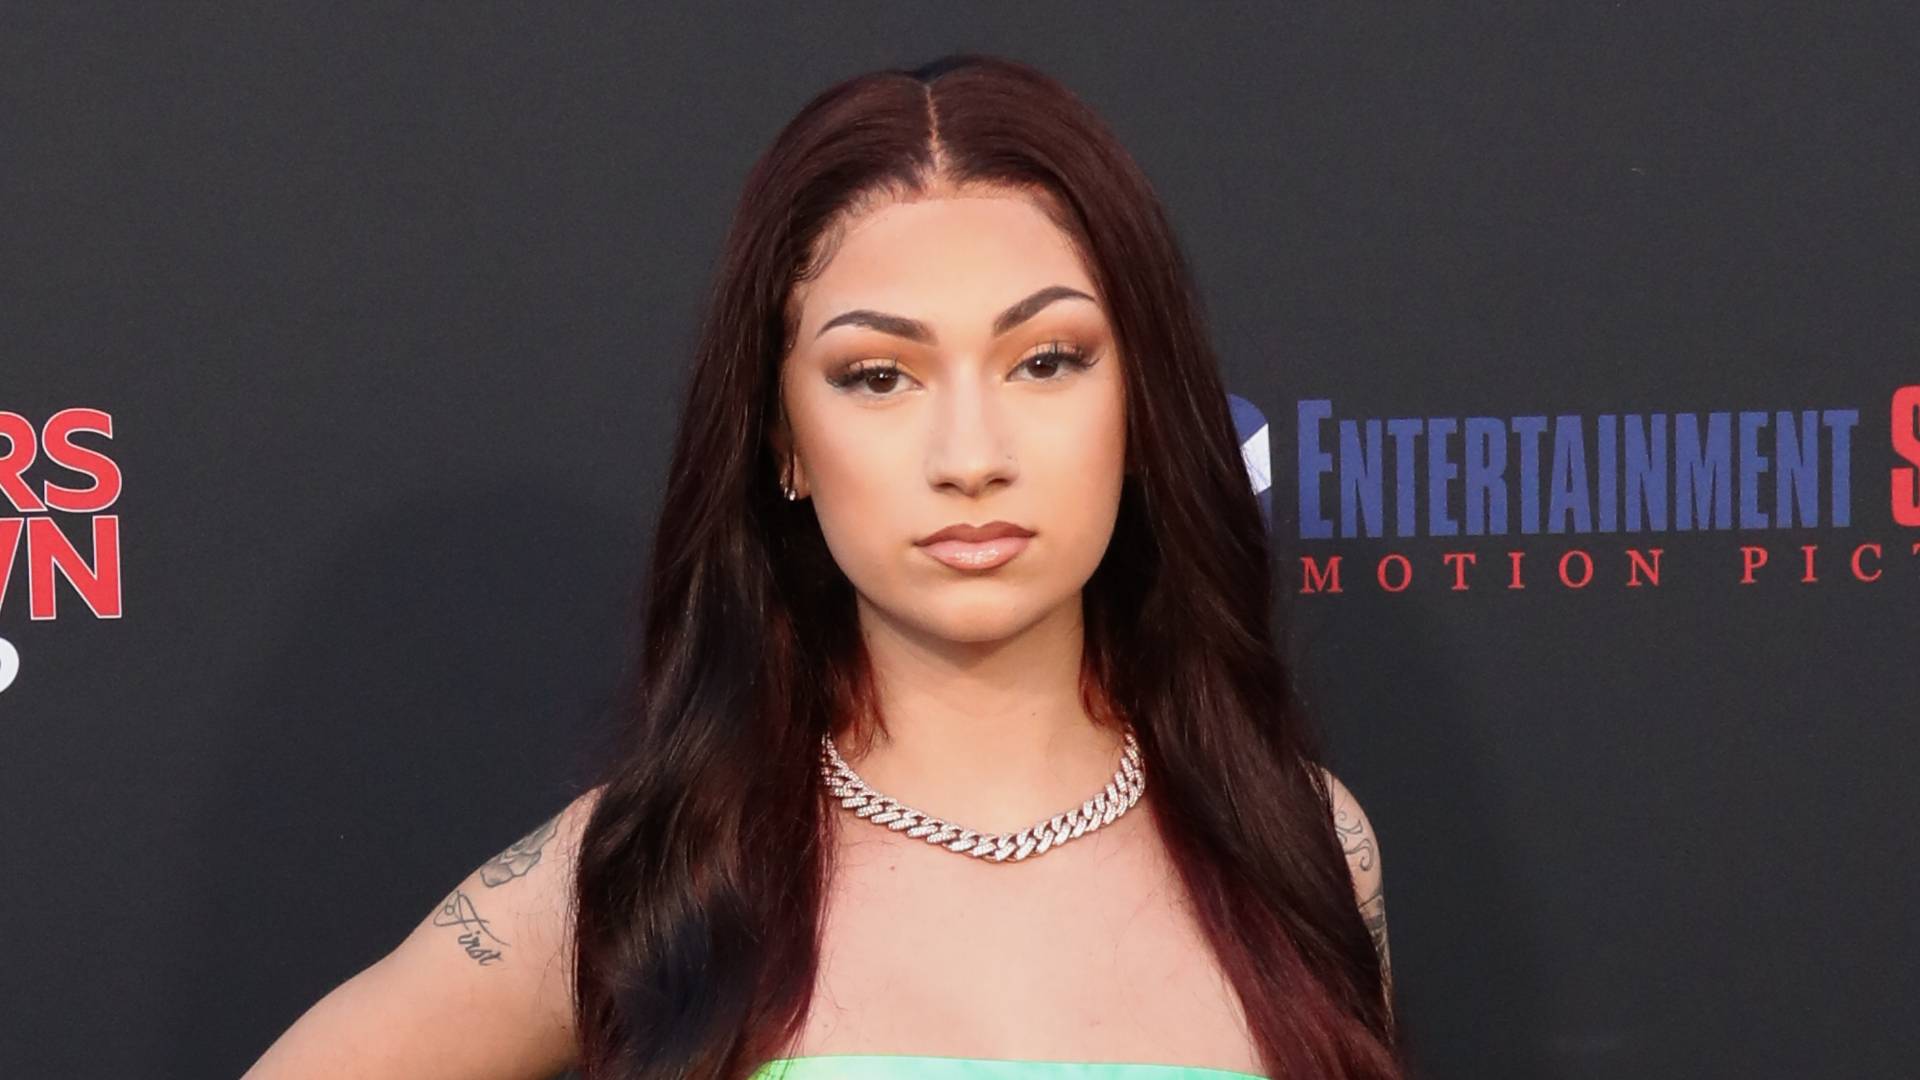 Bhad Bhabie Responds To 'Blackfishing' Accusations After Debuting A New Look On Social Media! | News | BET